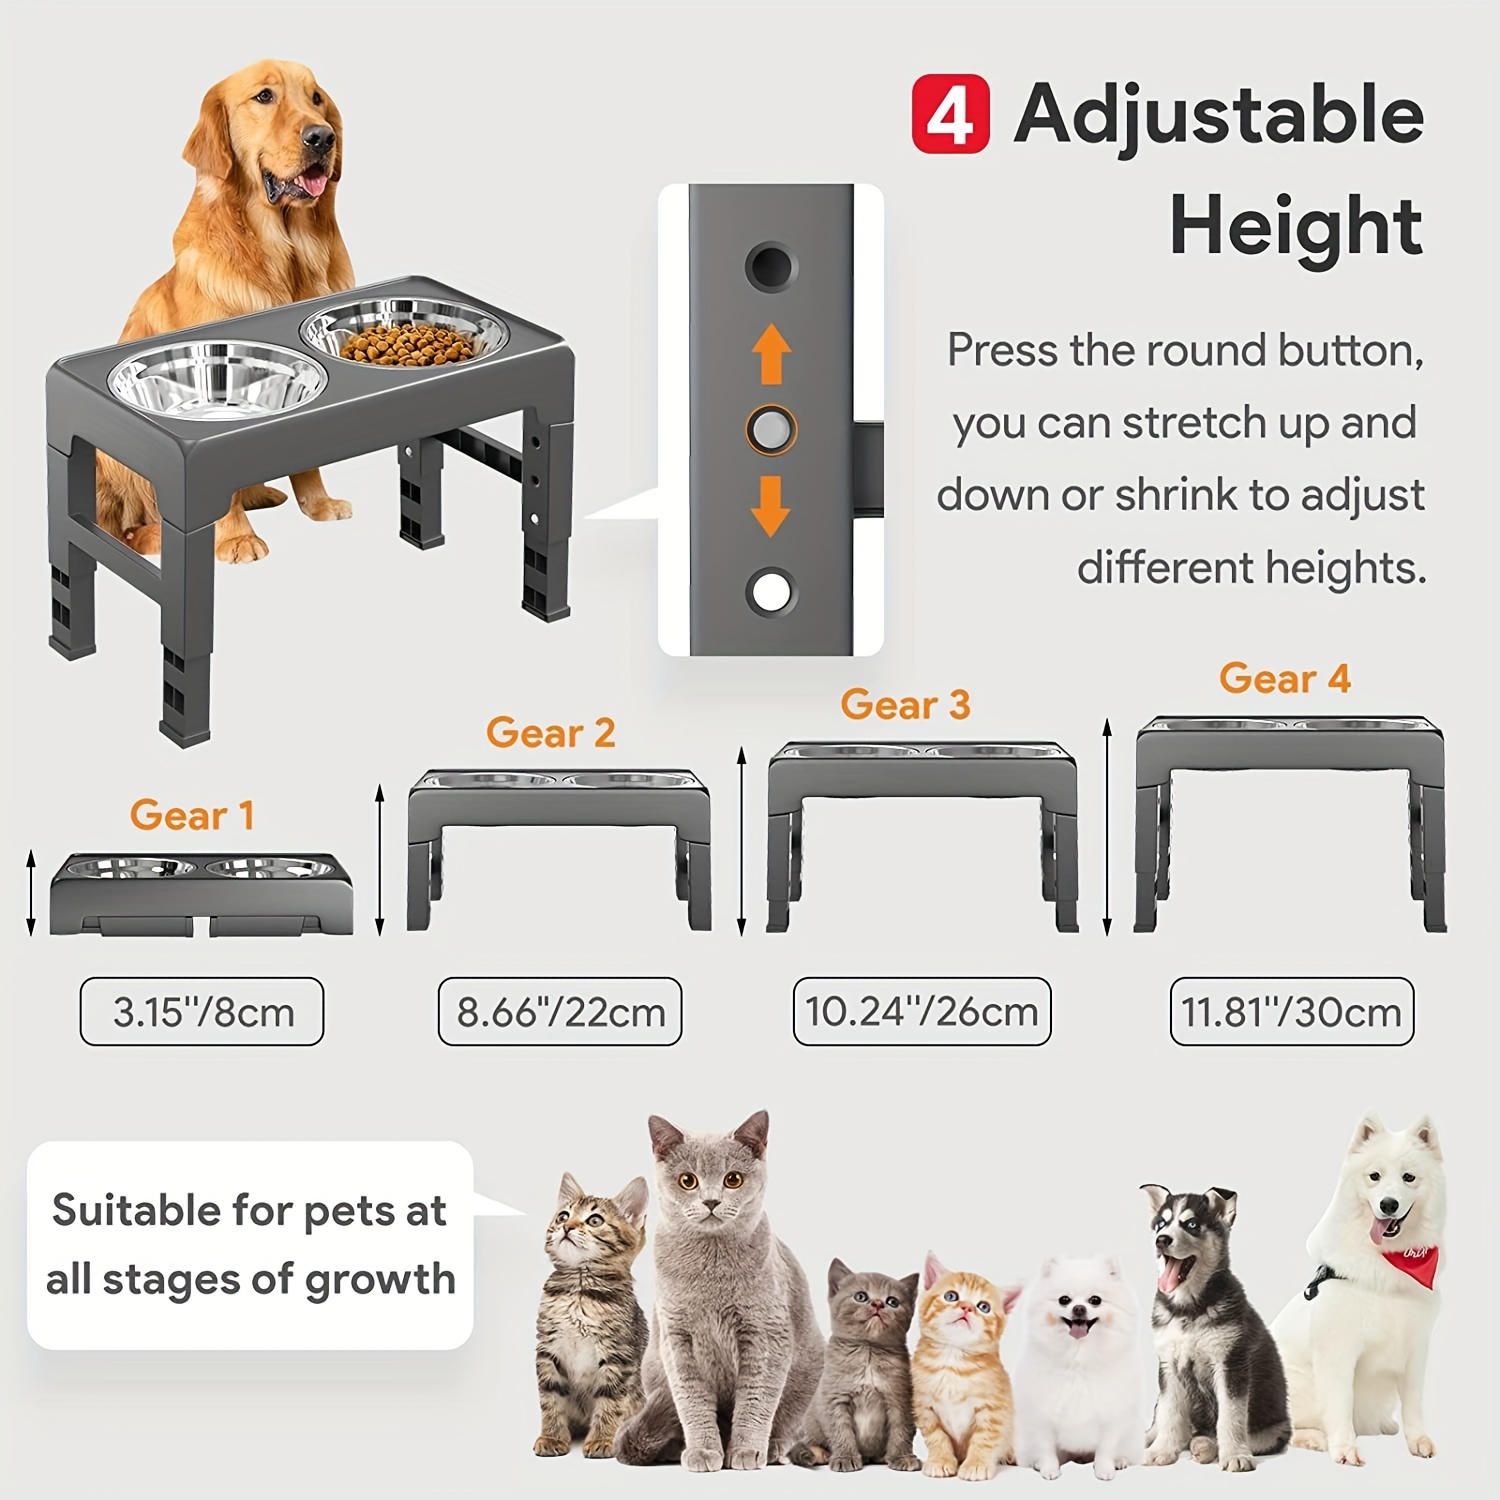 Elevated Dog Bowls Stand - Adjusts to 3 Heights for Small, Medium, and  Large Pets - Stainless-Steel Dog Bowls Hold 34oz Each by PETMAKER (Gray)